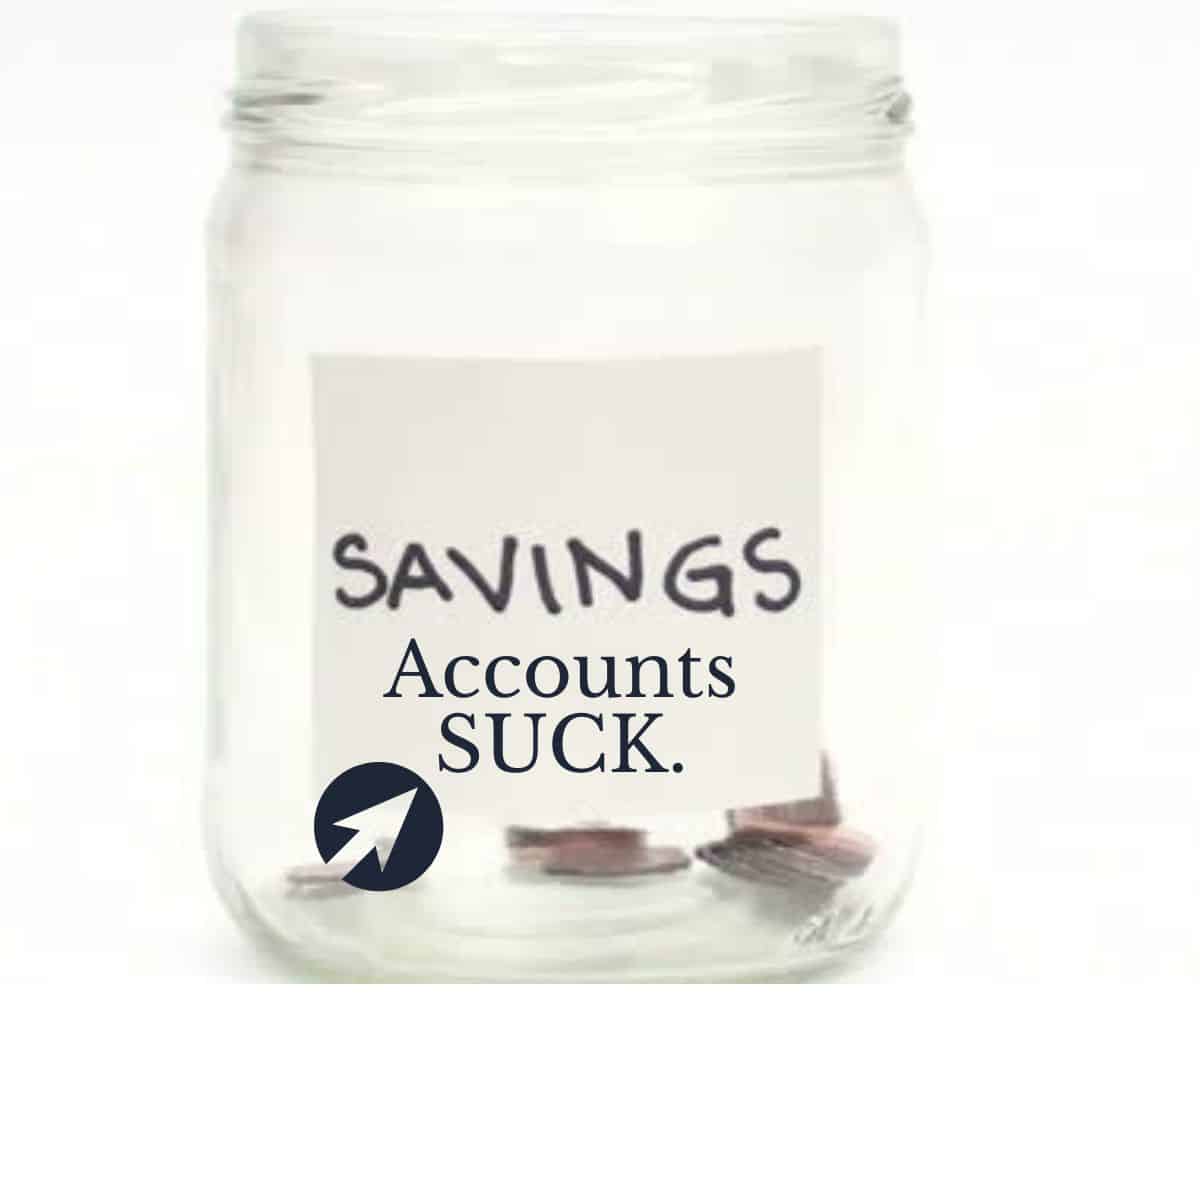 Find Out How Your Checking and Savings Accounts are Losing You Money Everyday